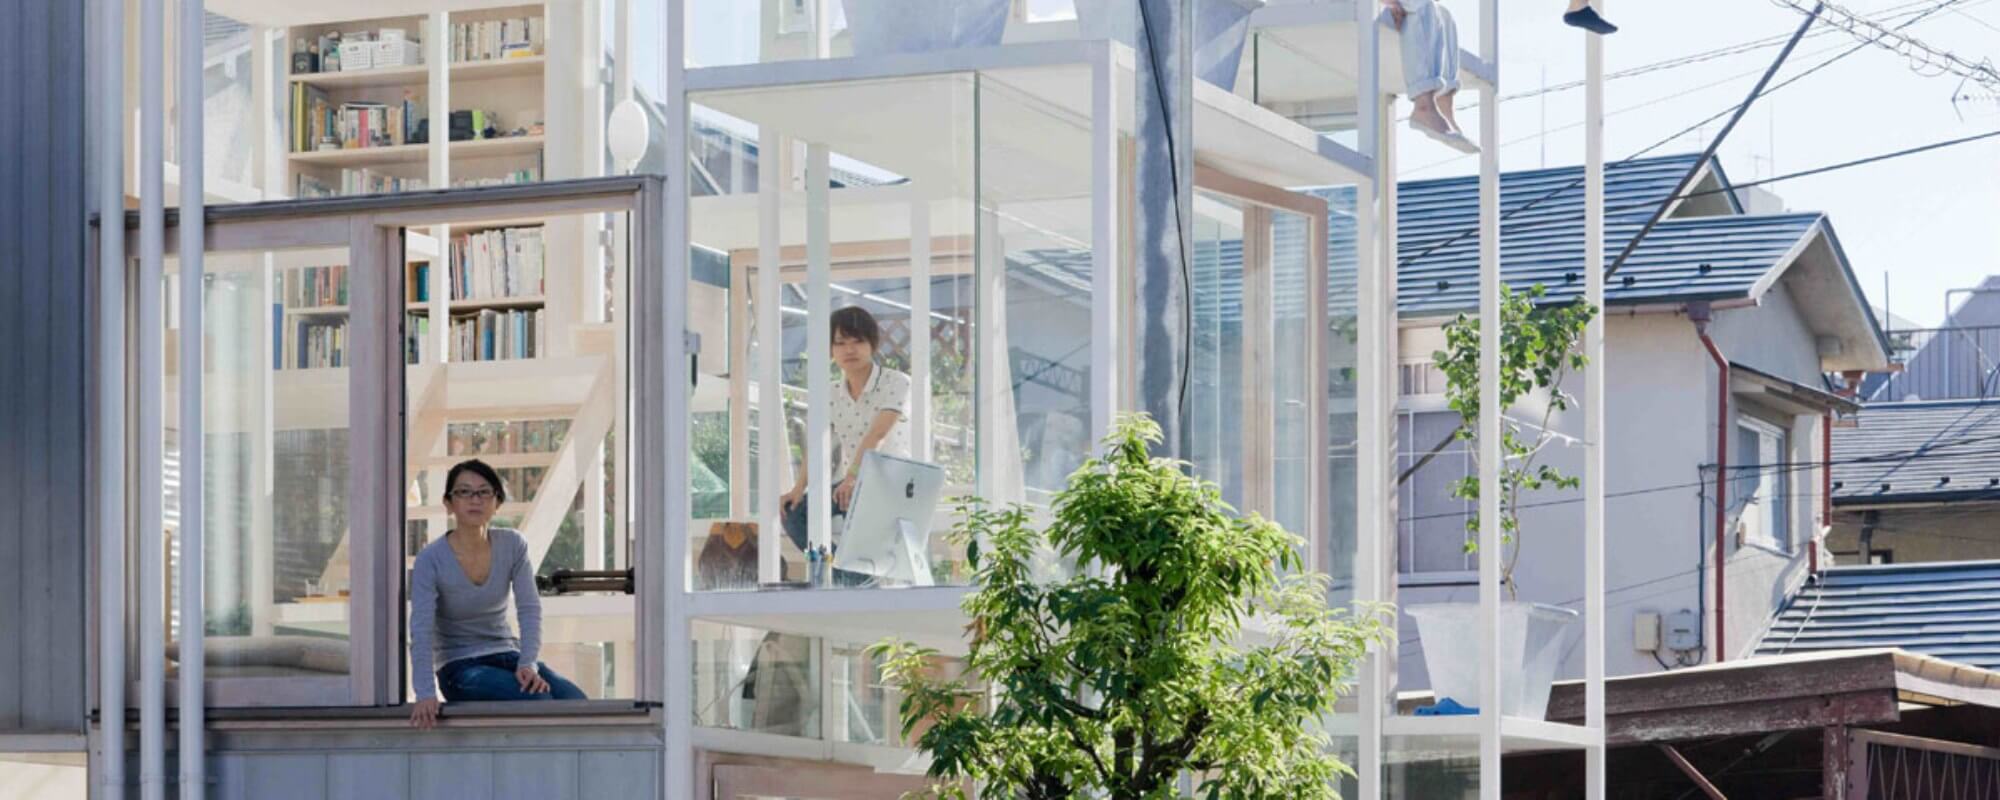 Architects Design Transparent House in Tokyo – Could You Live In This?